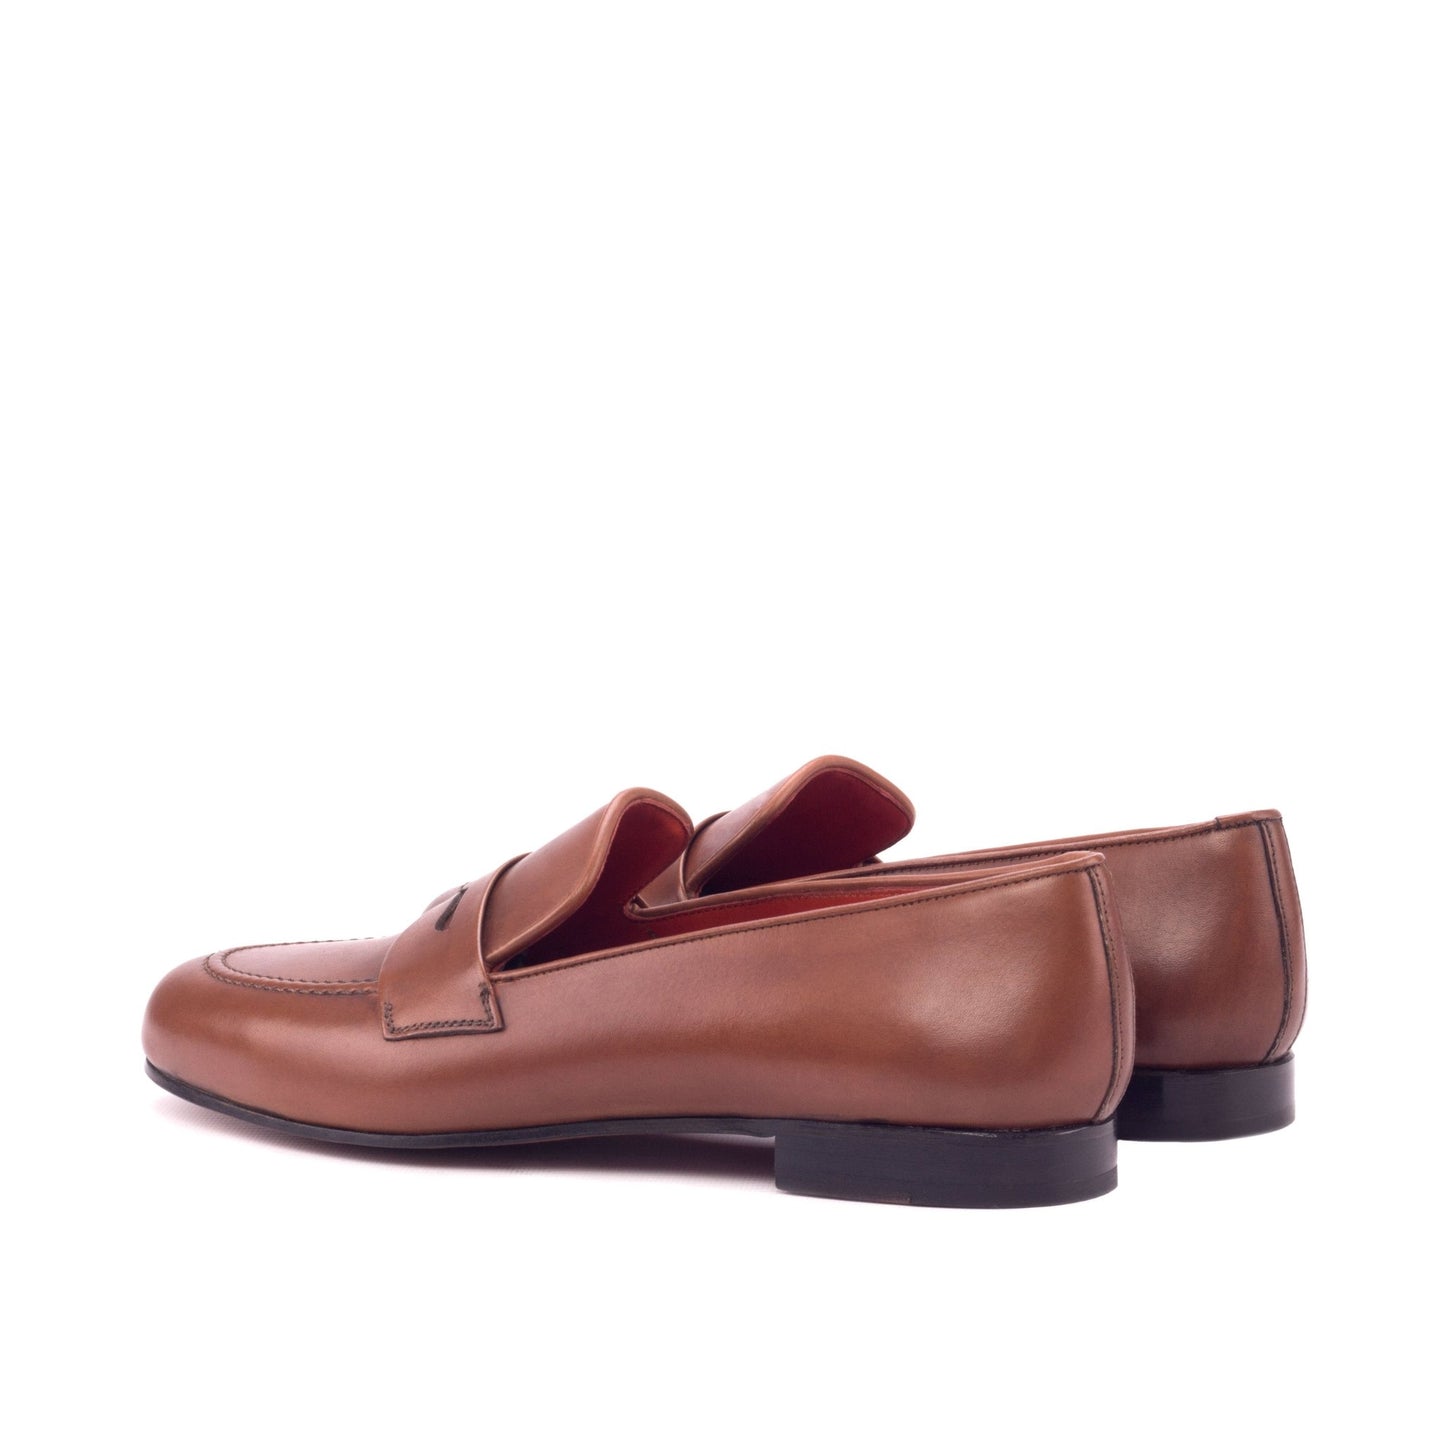 Santiago Slipper in Brown Calf - Zatorres | Free Shipping on orders over $200